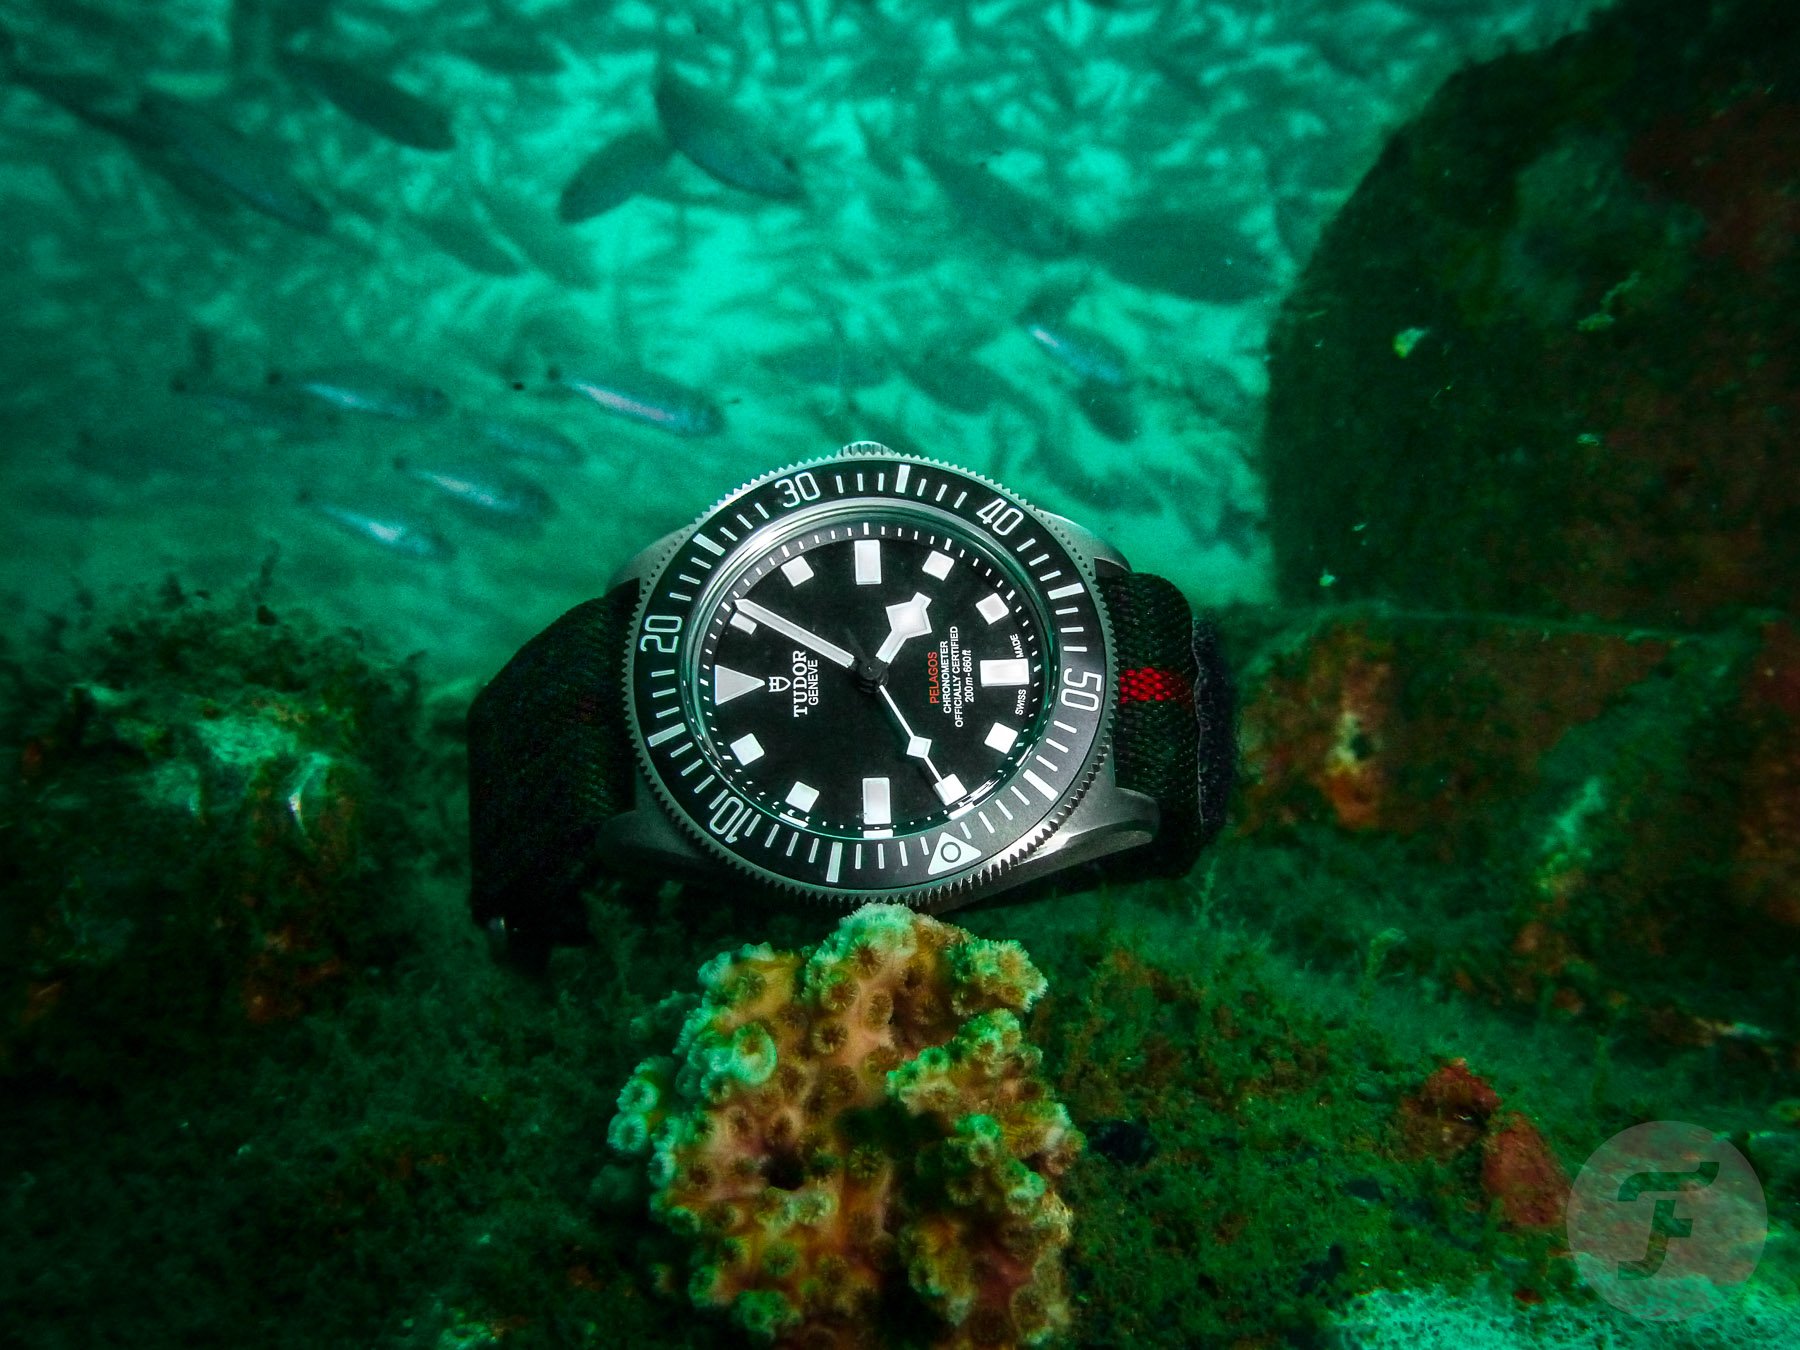 Hands-On: Putting The New Tudor Pelagos FXD Through Its Paces On Florida’s Emerald Coast